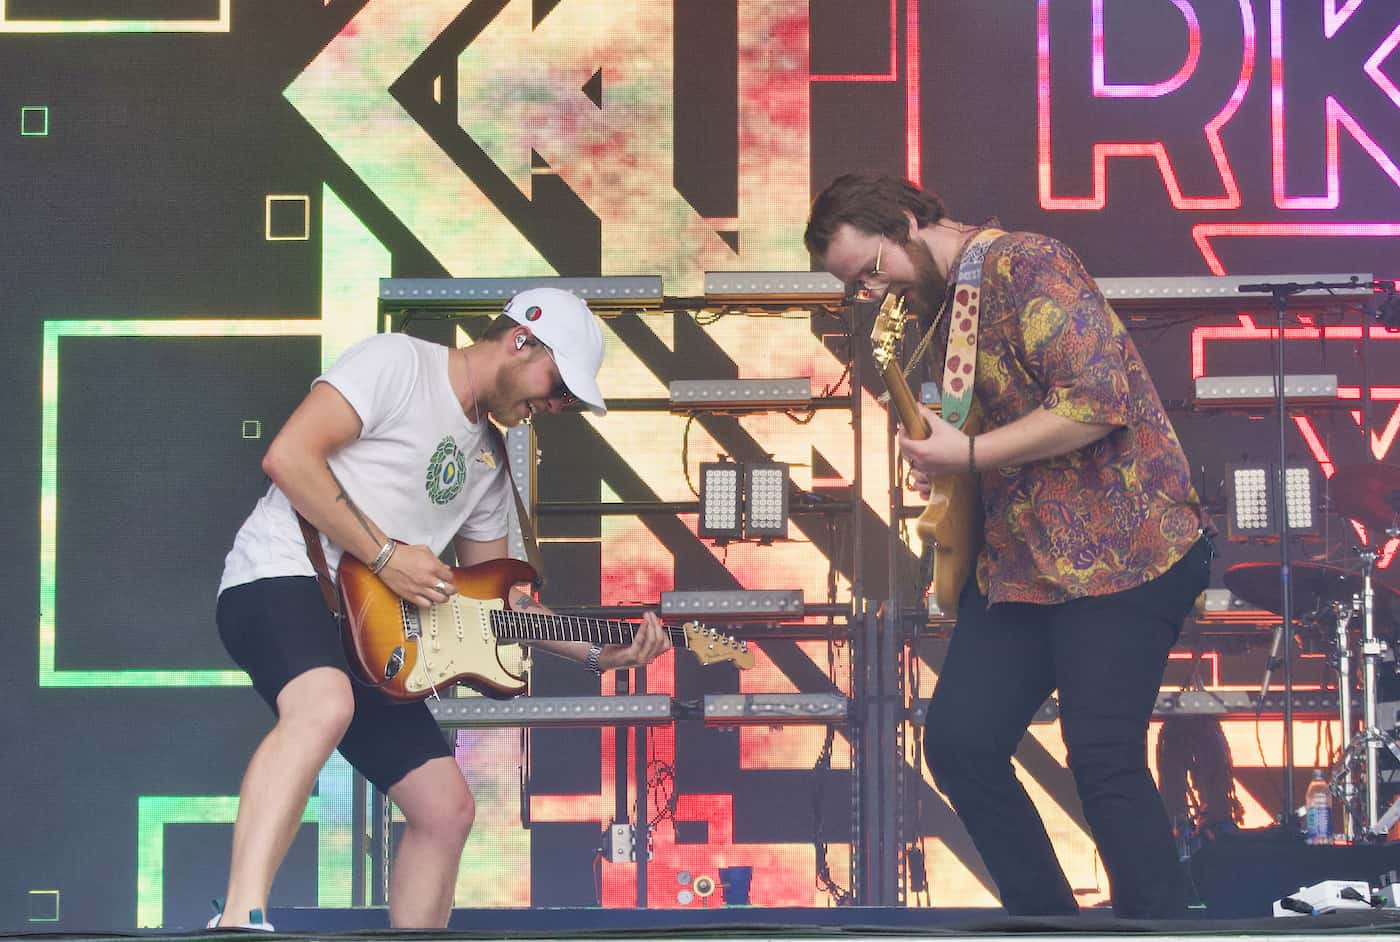 Photograph of Rainbow Kitten Surprise performing at Boston Calling Festival in 2019